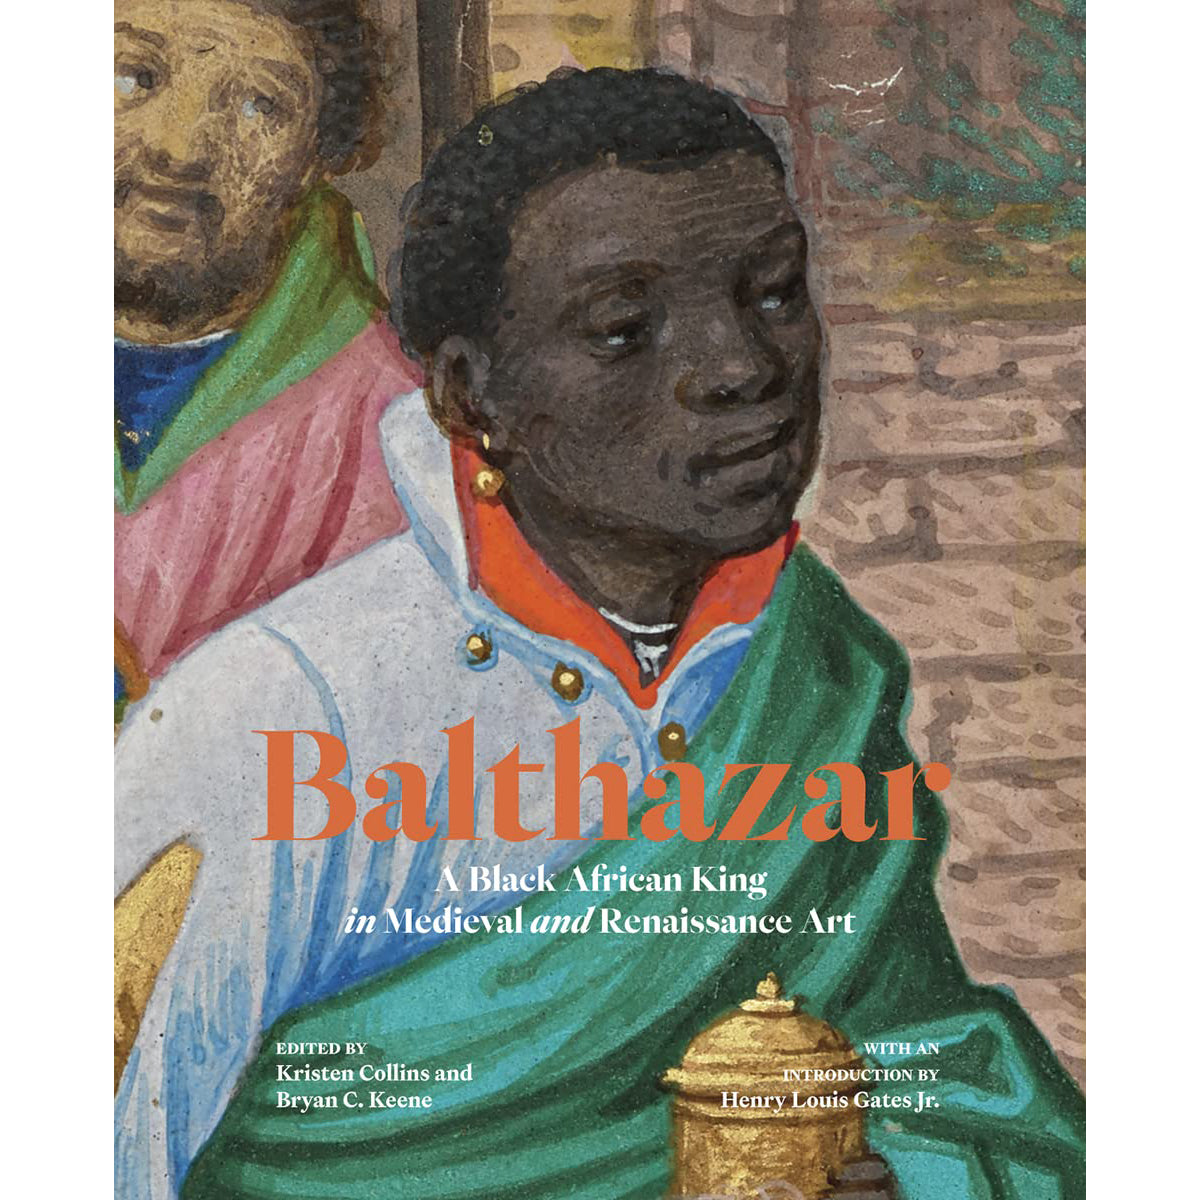 Balthazar: A Black African King in Medieval and Renaissance Art by Kristen Collins